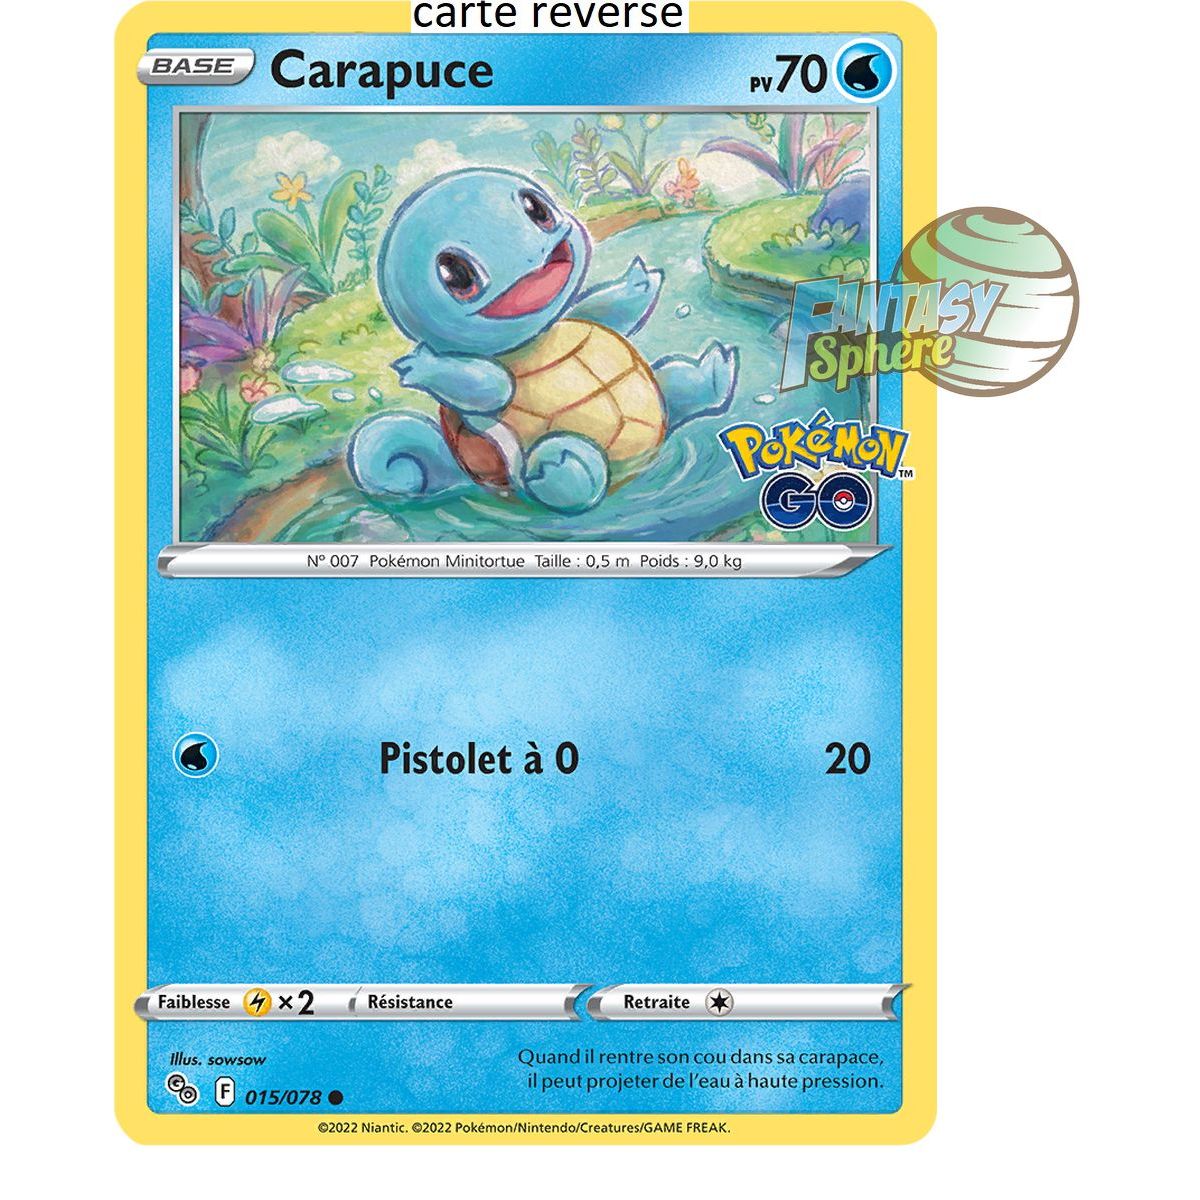 Item Squirtle - Reverse 15/78 - Sword and Shield 10.5 Pokemon GO